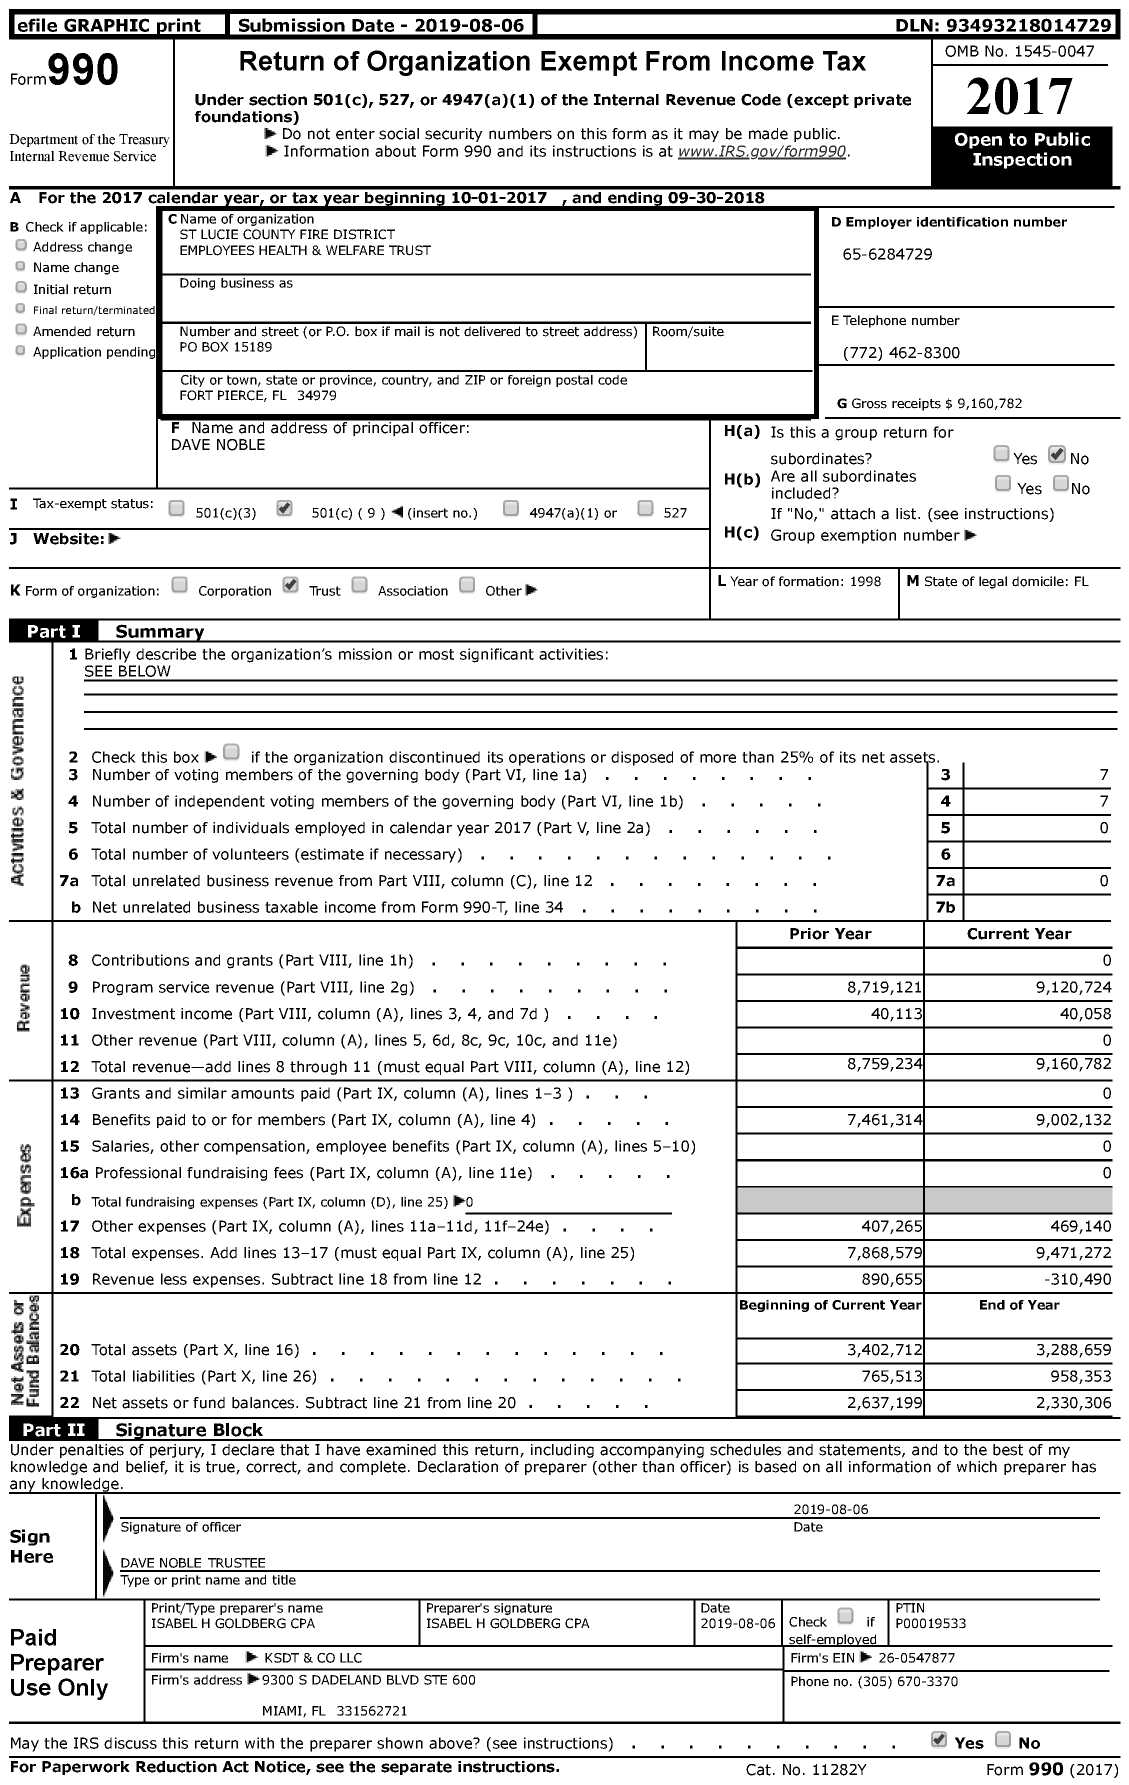 Image of first page of 2017 Form 990 for St Lucie County Fire District Employees Health and Welfare Trust